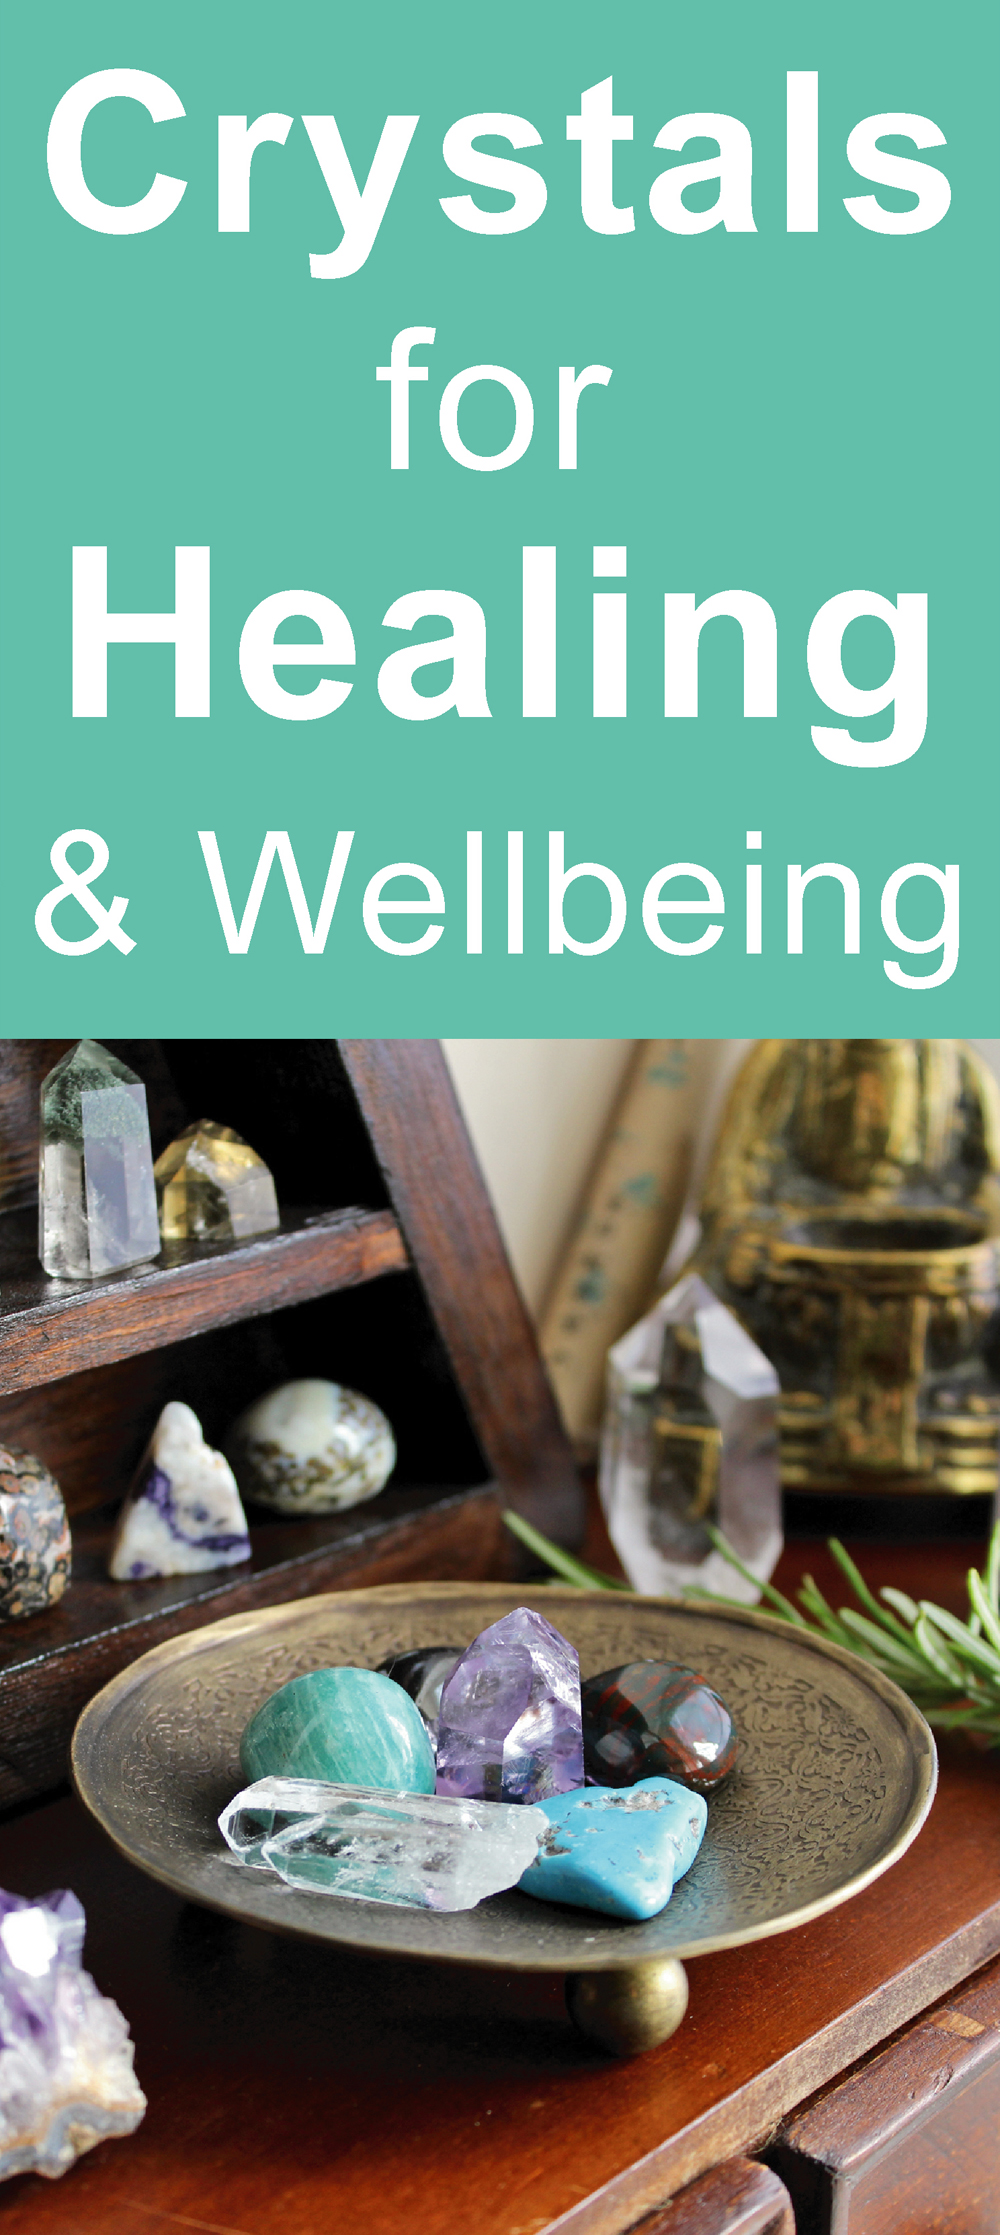 Crystals for healing, health and wellbeing